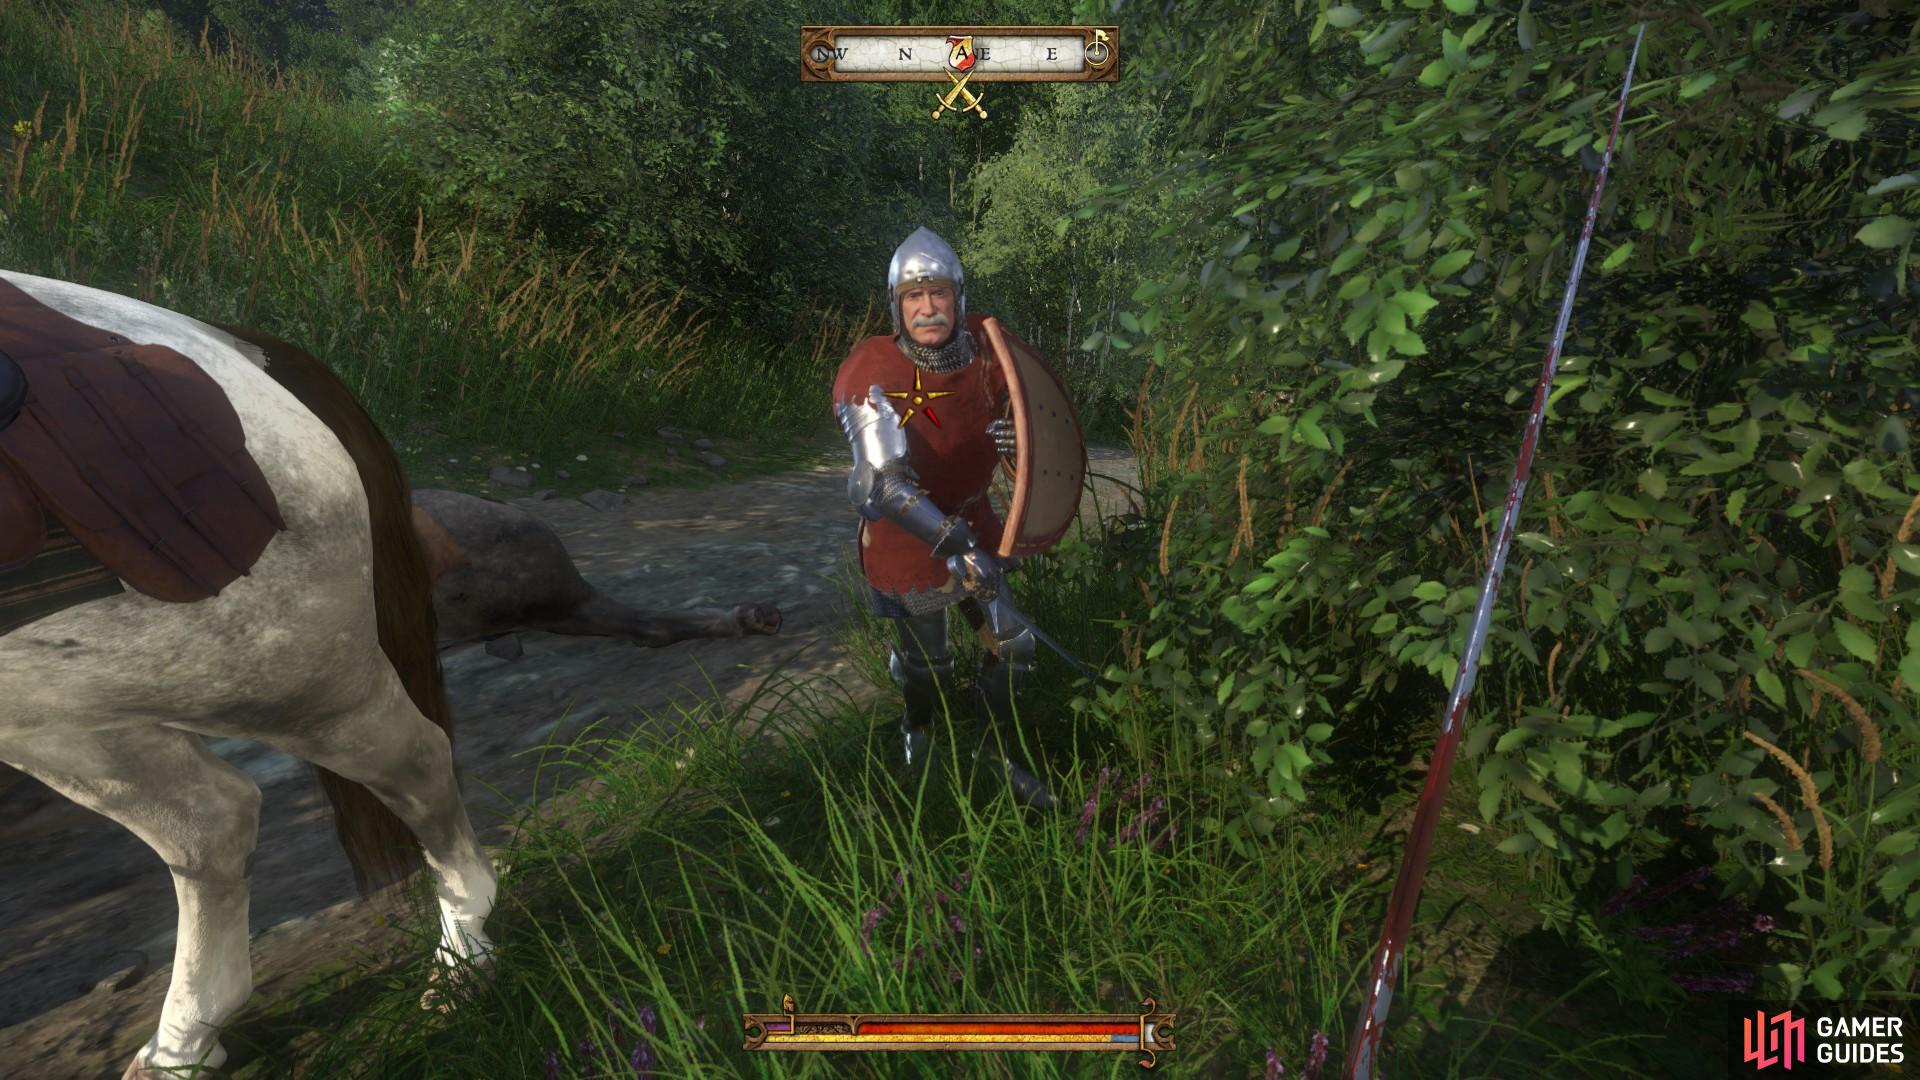 Defeating the knight in combat is by far the most entertaining option.